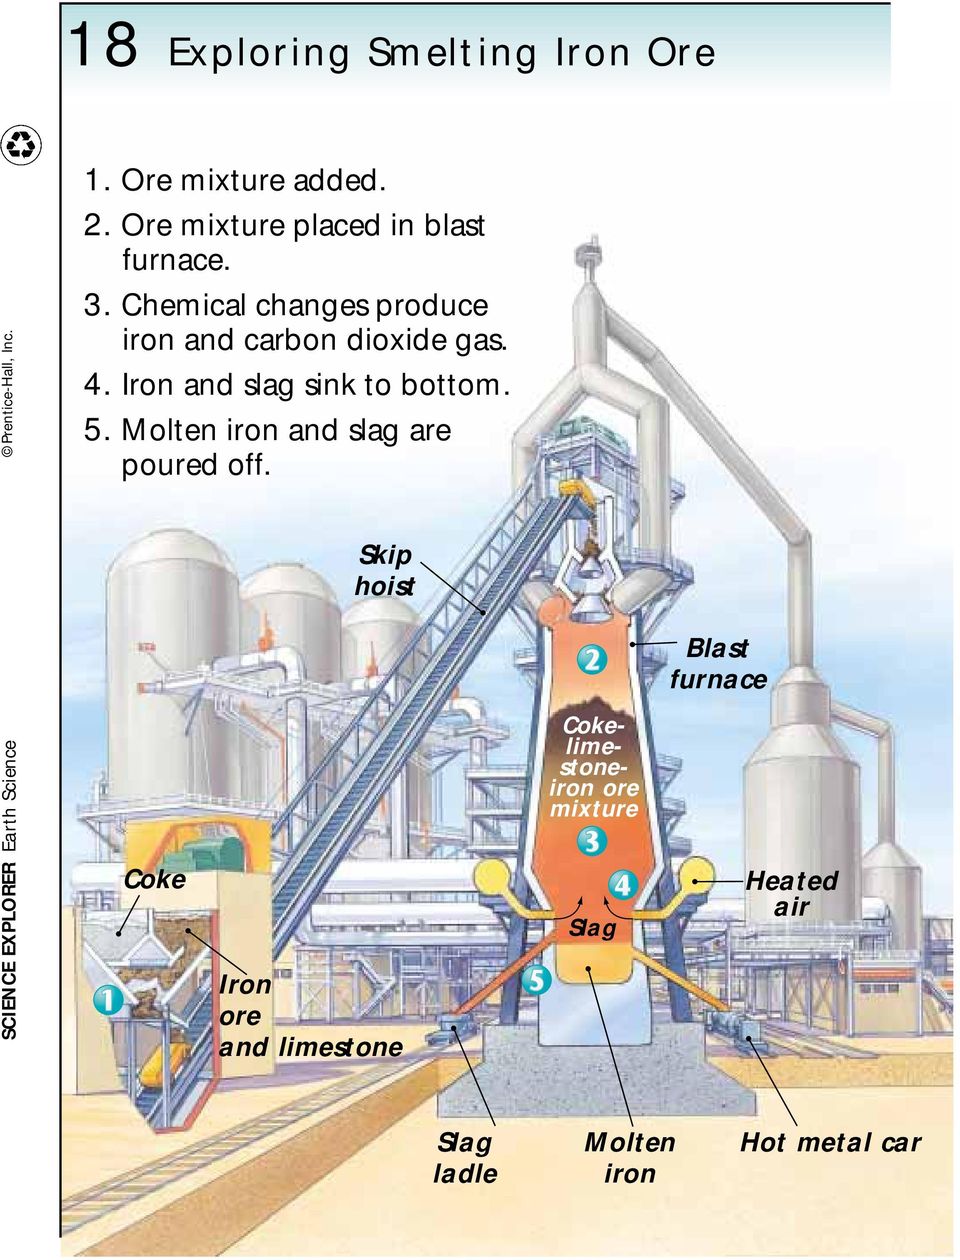 Chemical changes produce iron and carbon dioxide gas. 4. Iron and slag sink to bottom. 5.